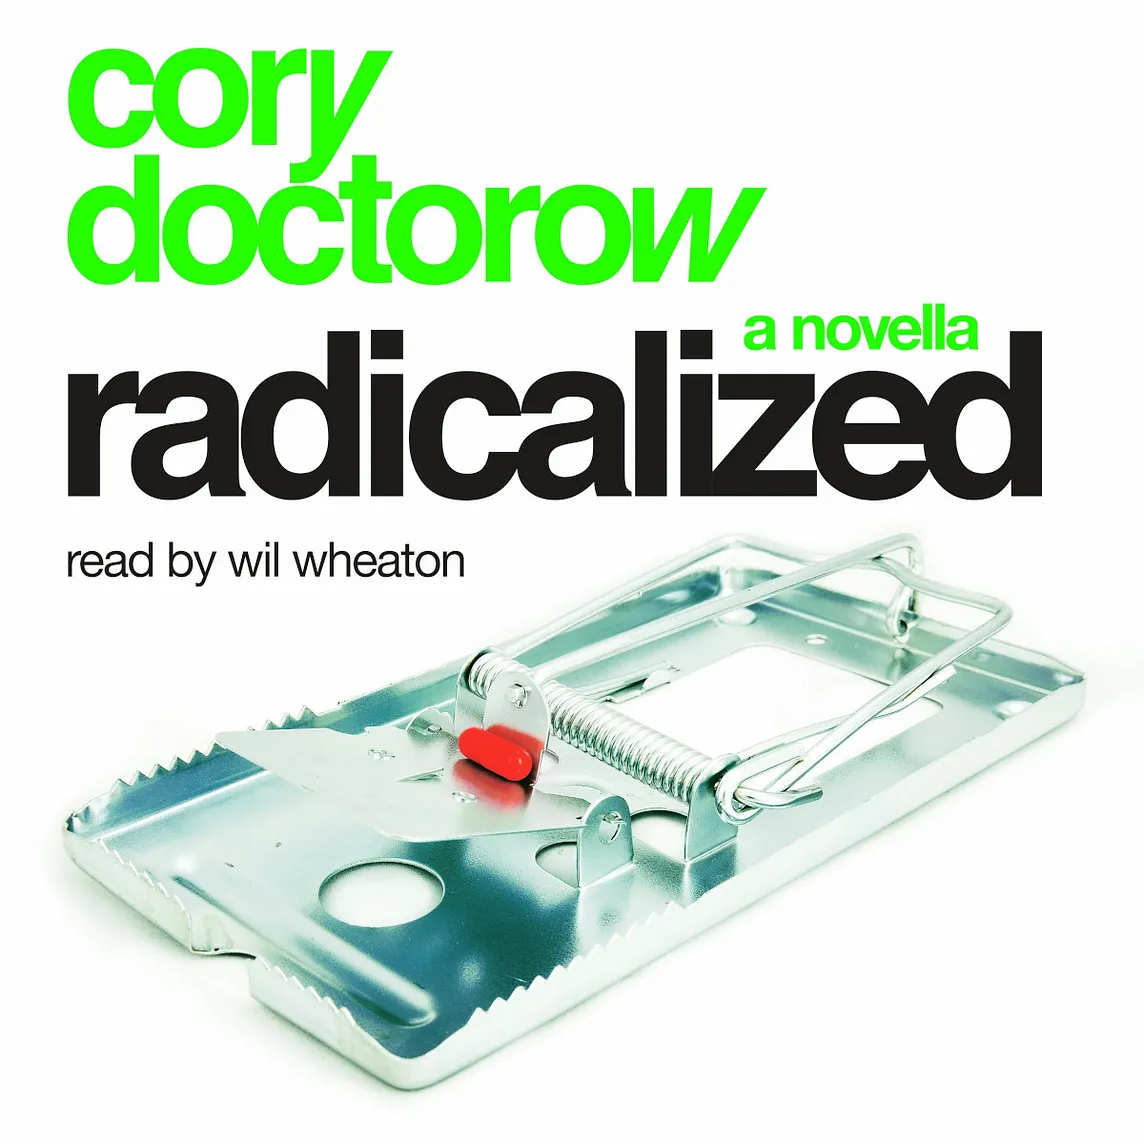 The cover for the audiobook edition of my novella ‘Radicalized,’ which features a vicious-looking mousetrap, baited with a pill.